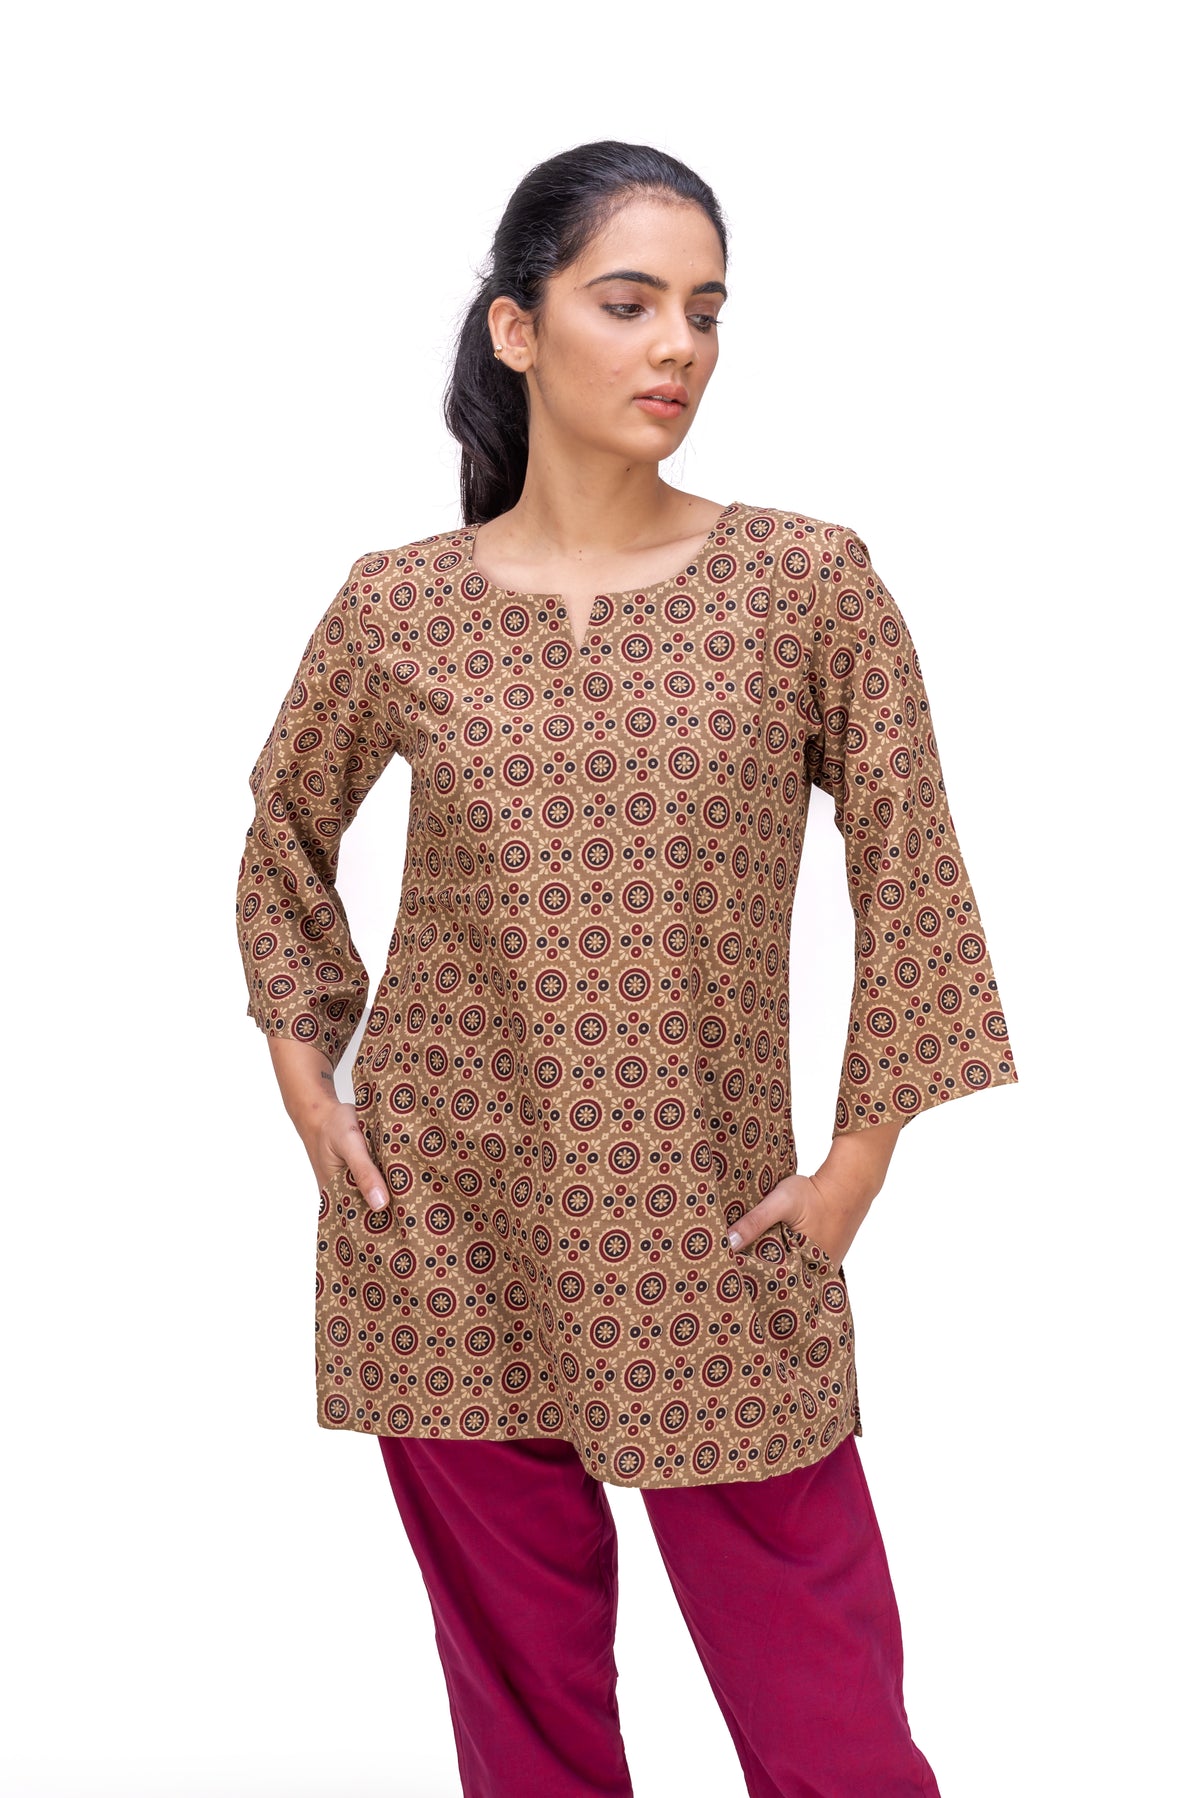 501-149 "Bell" Tunic top